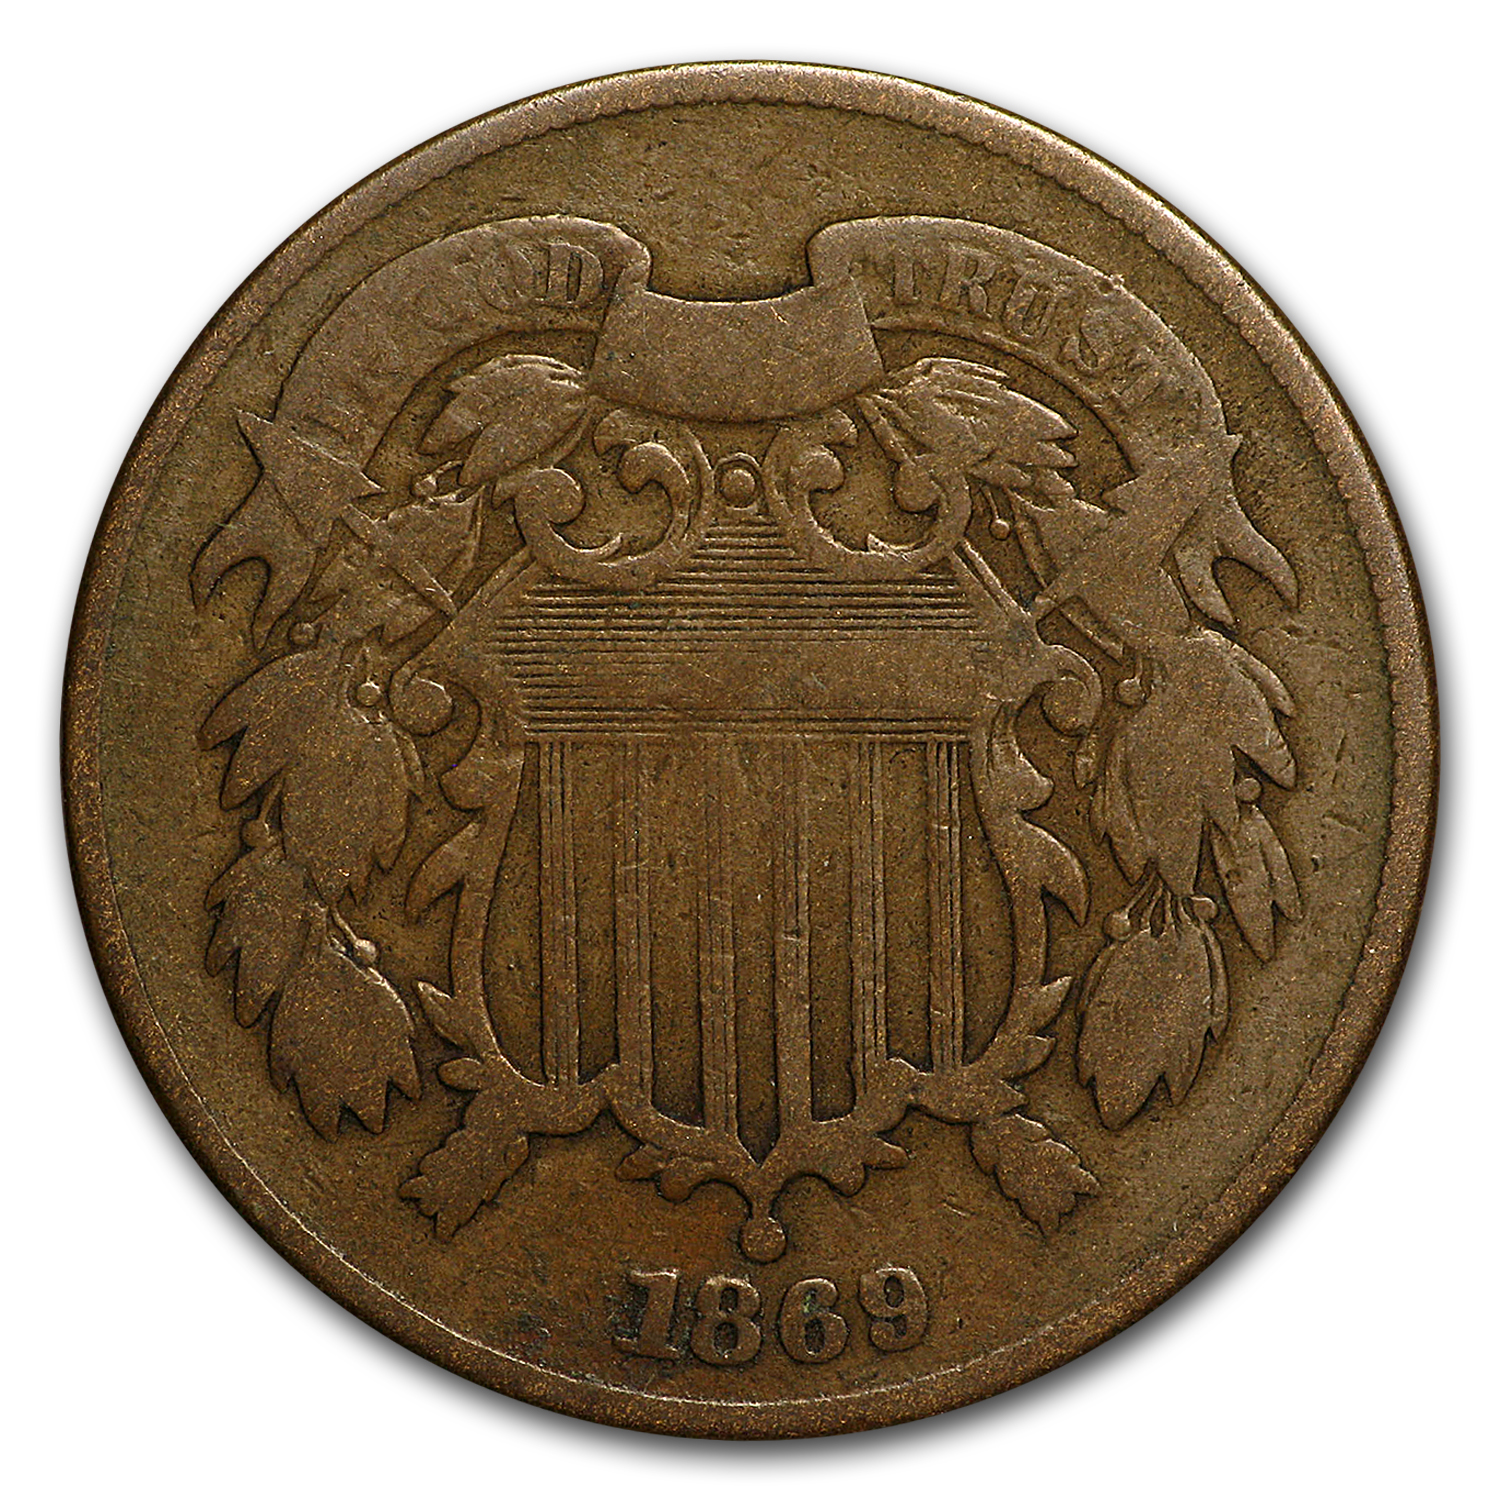 Buy 1869 Two Cent Piece VG